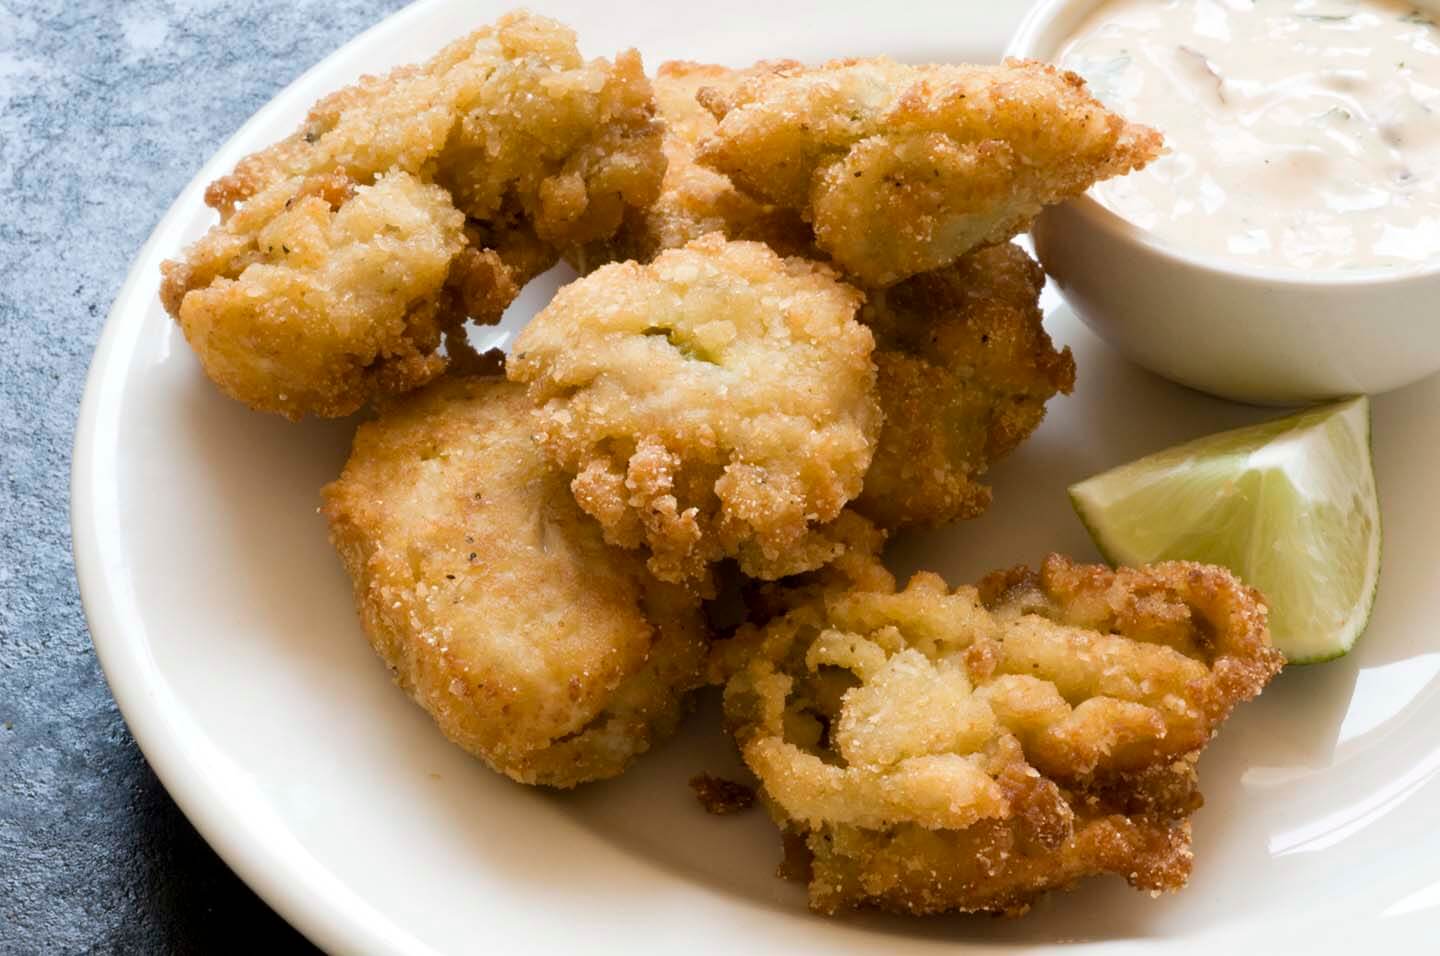 Fried oysters with a chipotle-lime dipping sauce | Homesick Texan